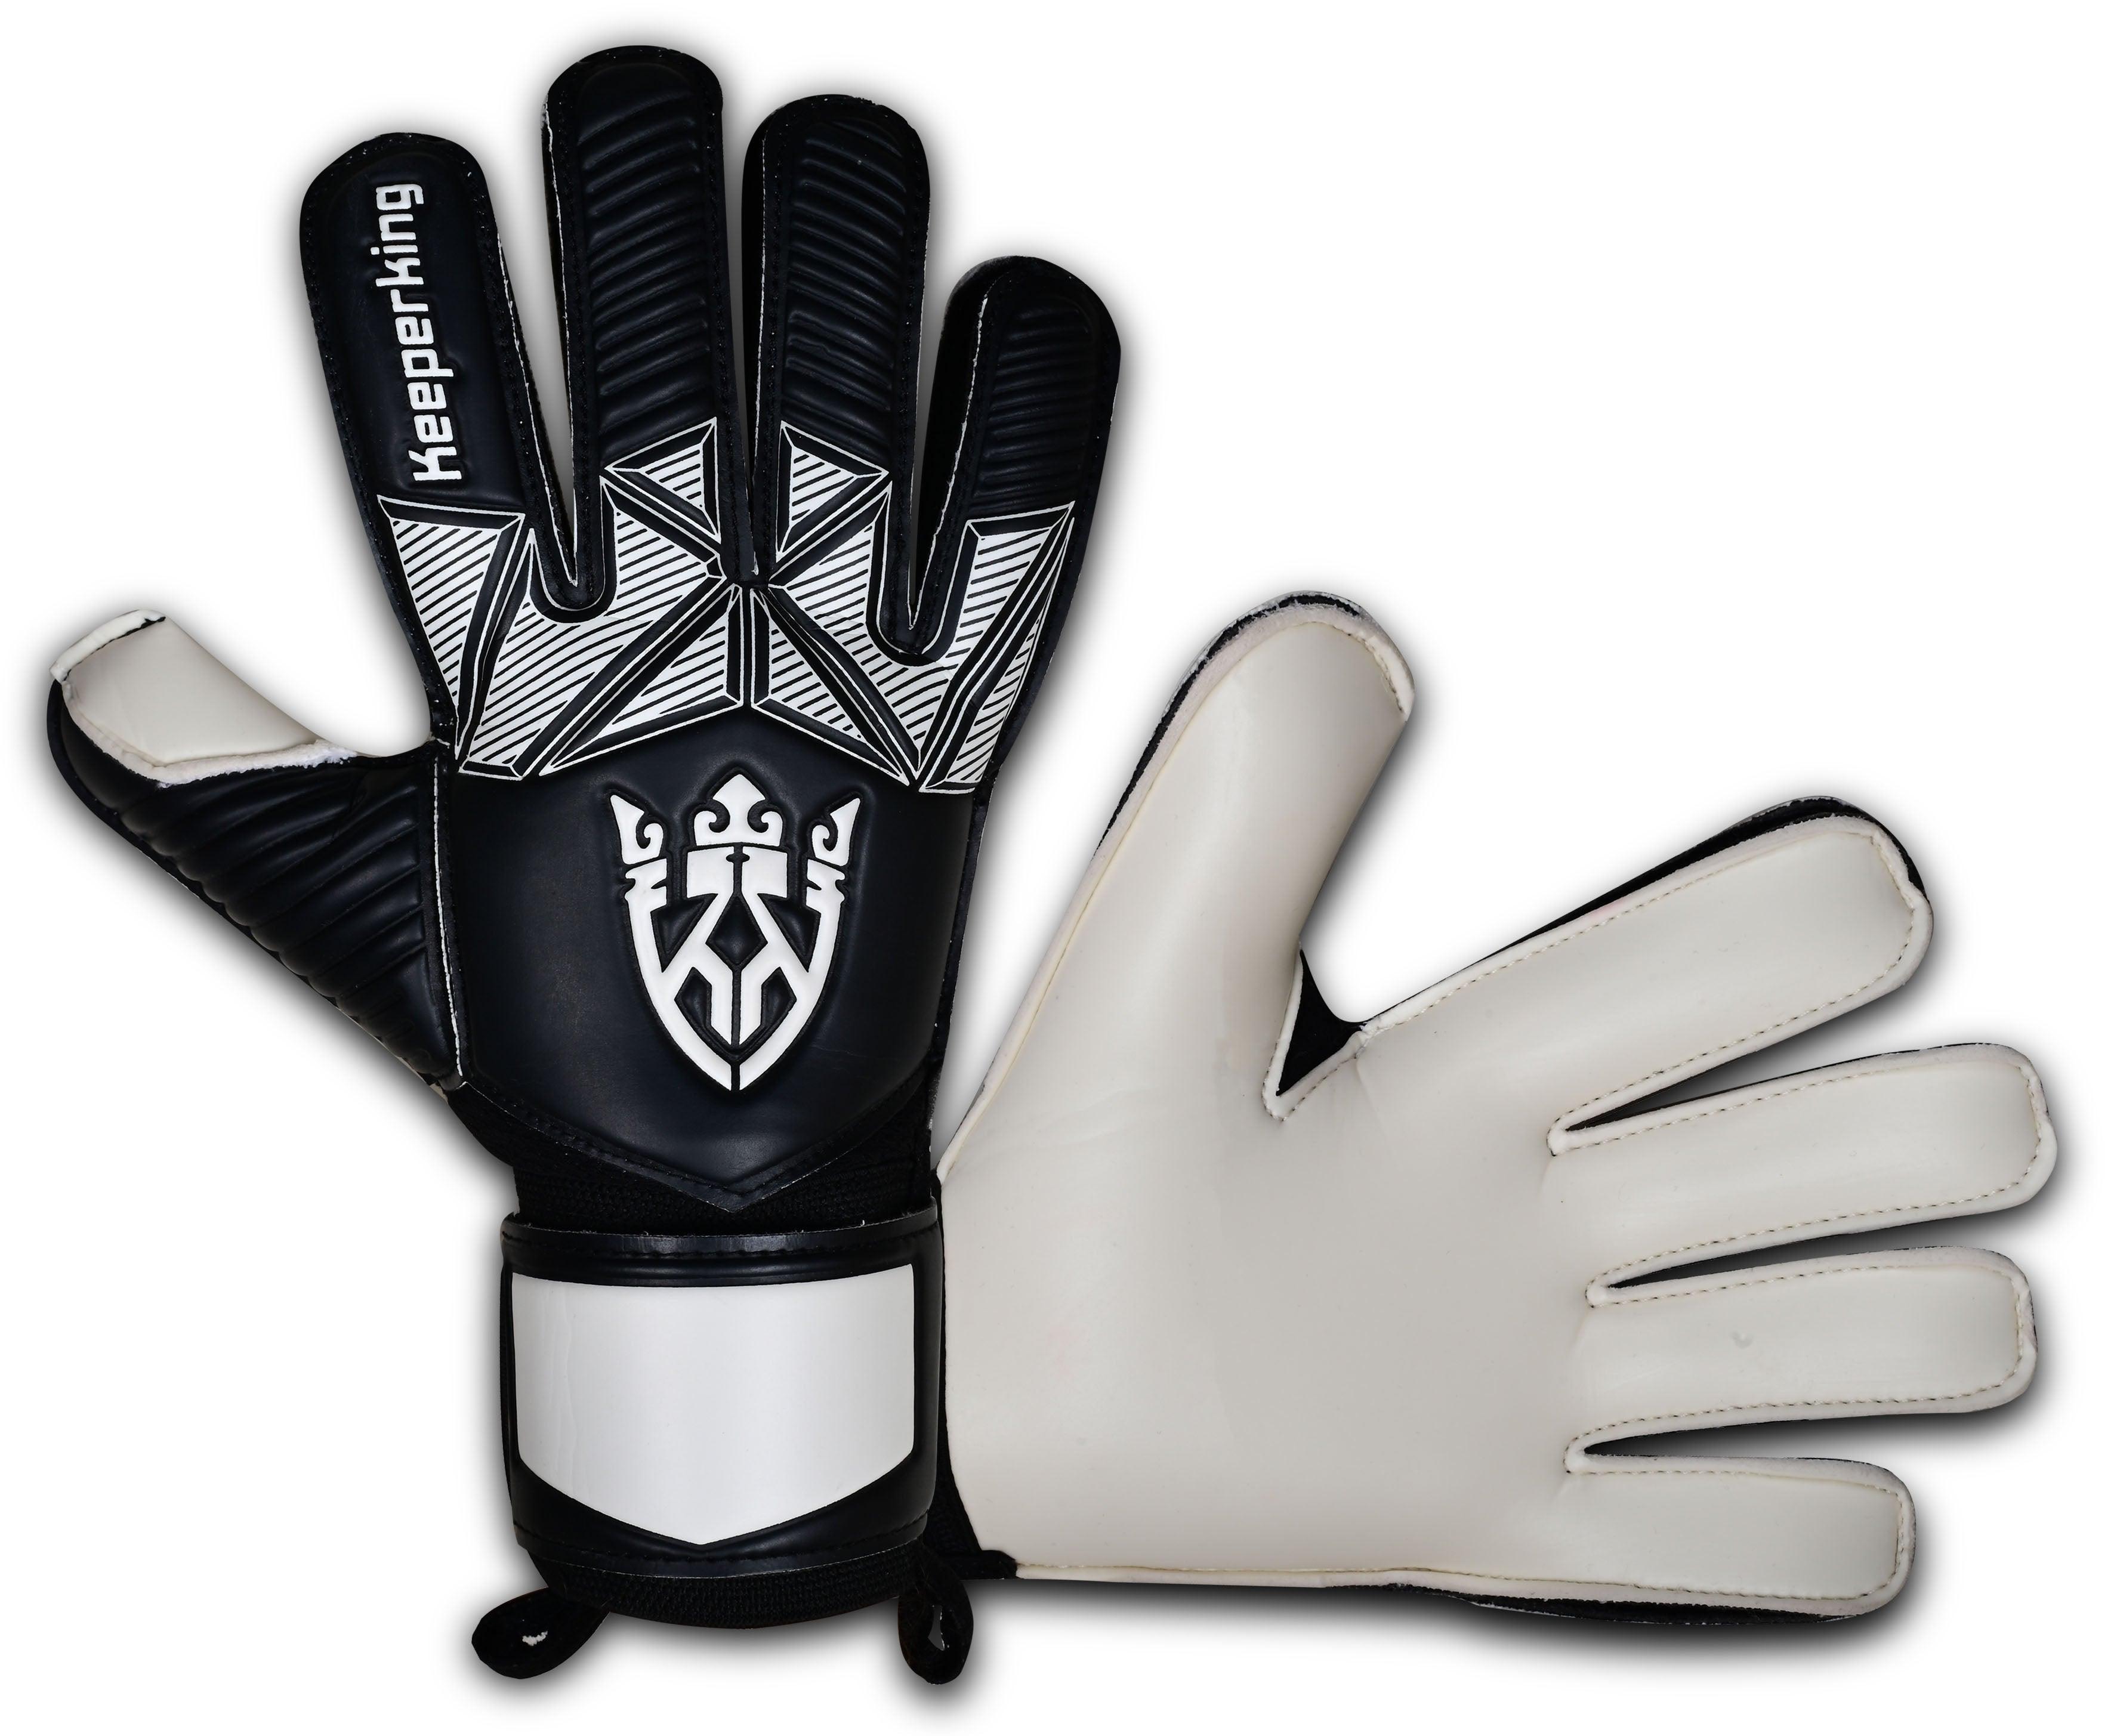 ALPHA WHITE WITHOUT FINGERSAVE goalkeeper gloves